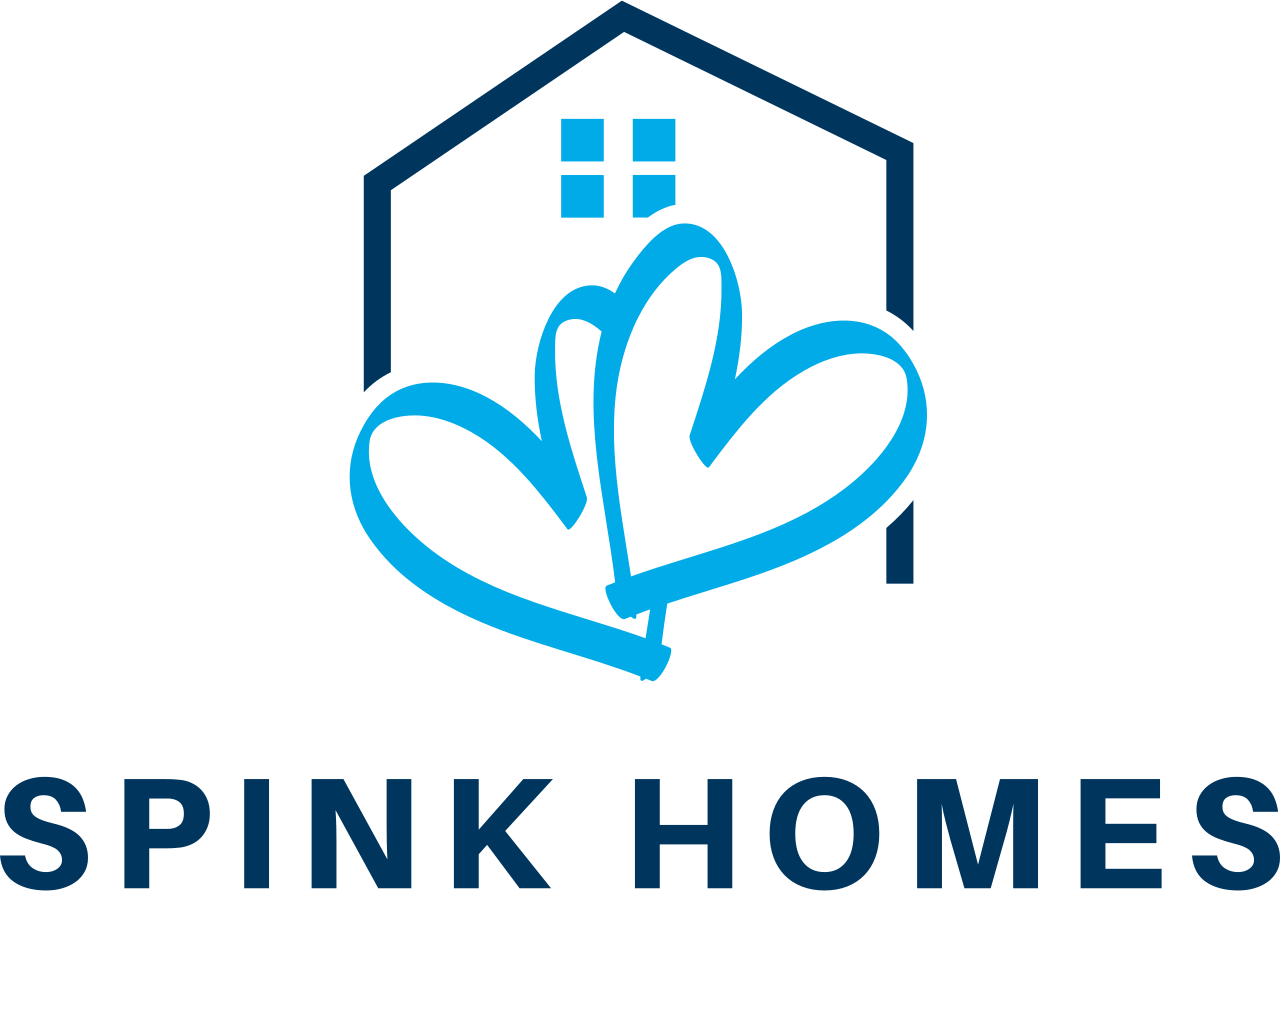 Spink Homes's web page